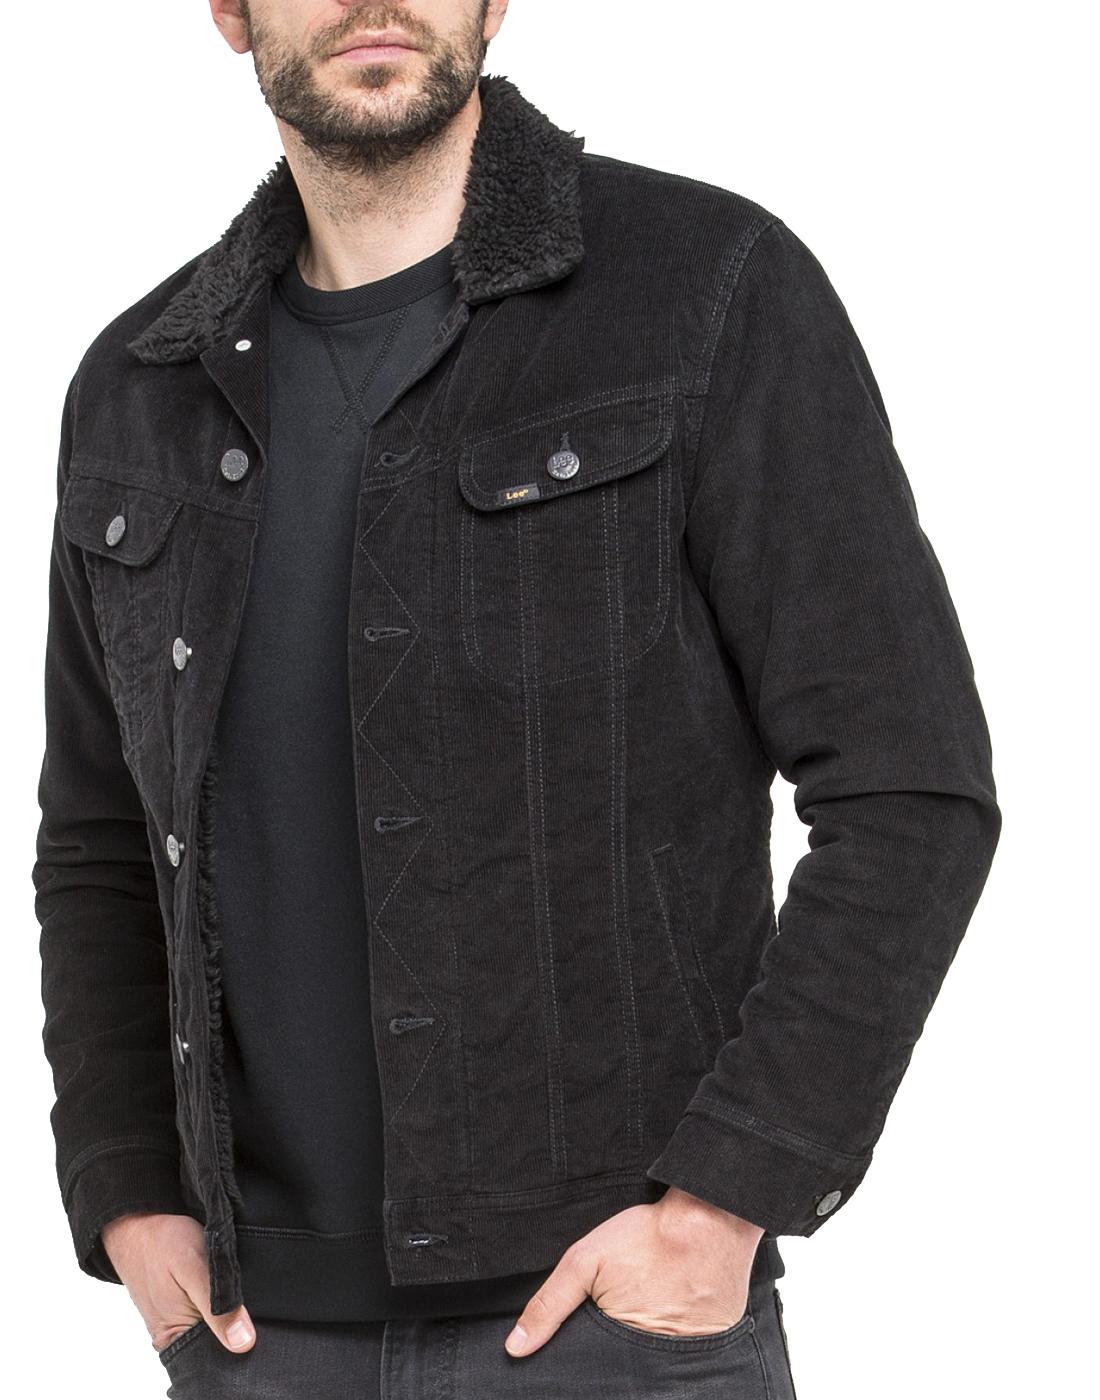 lee jean jacket with corduroy collar